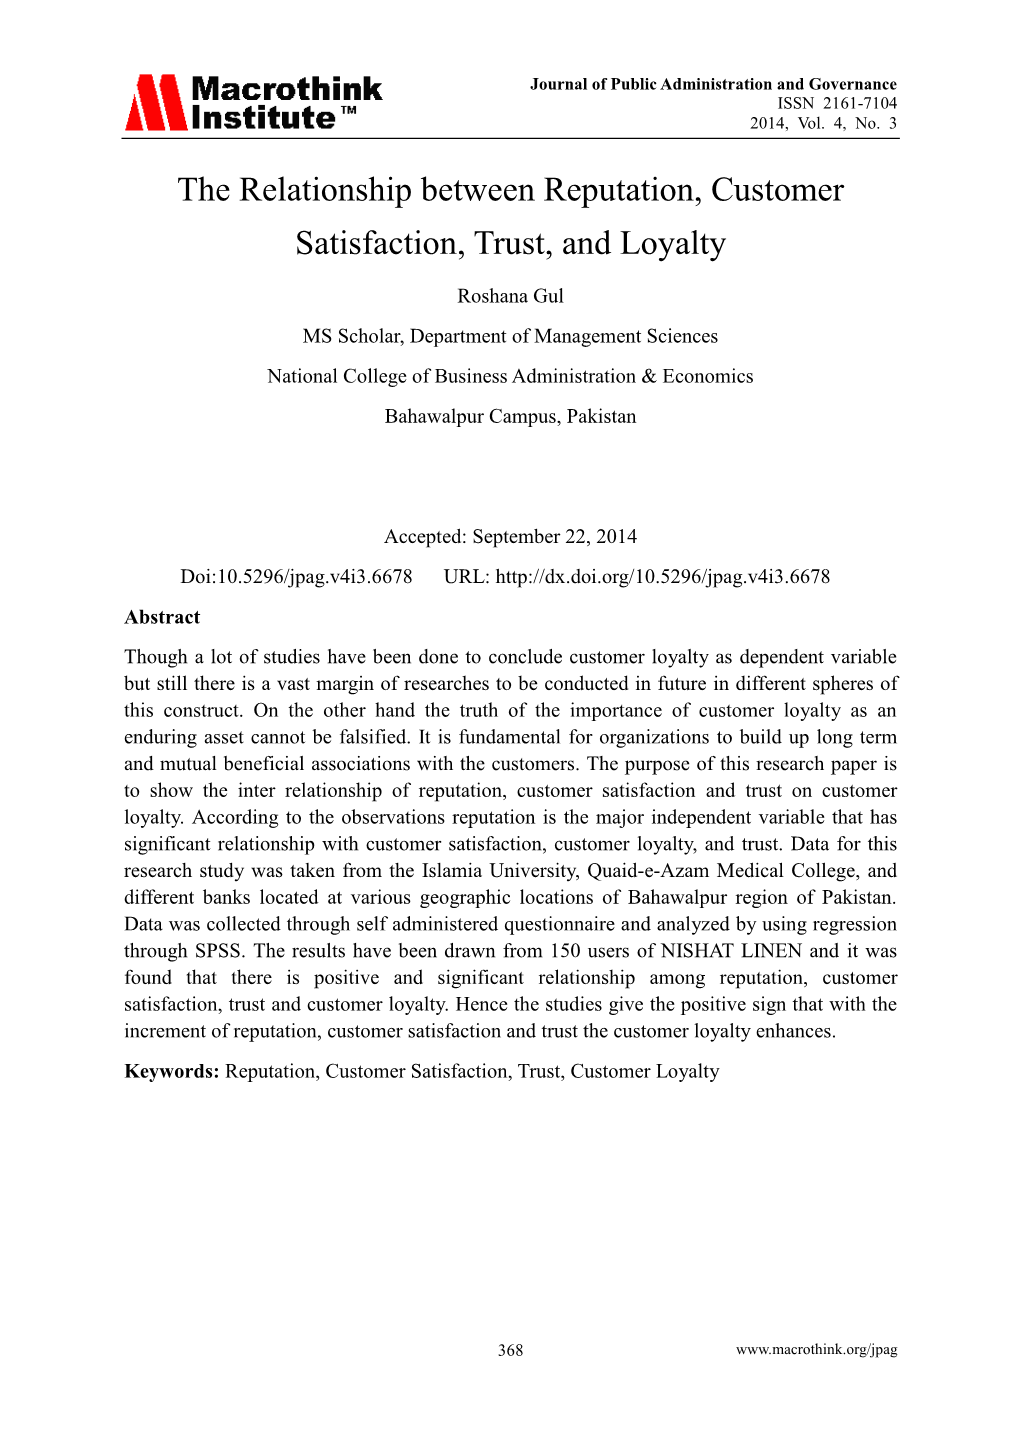 The Relationship Between Reputation, Customer Satisfaction, Trust, and Loyalty